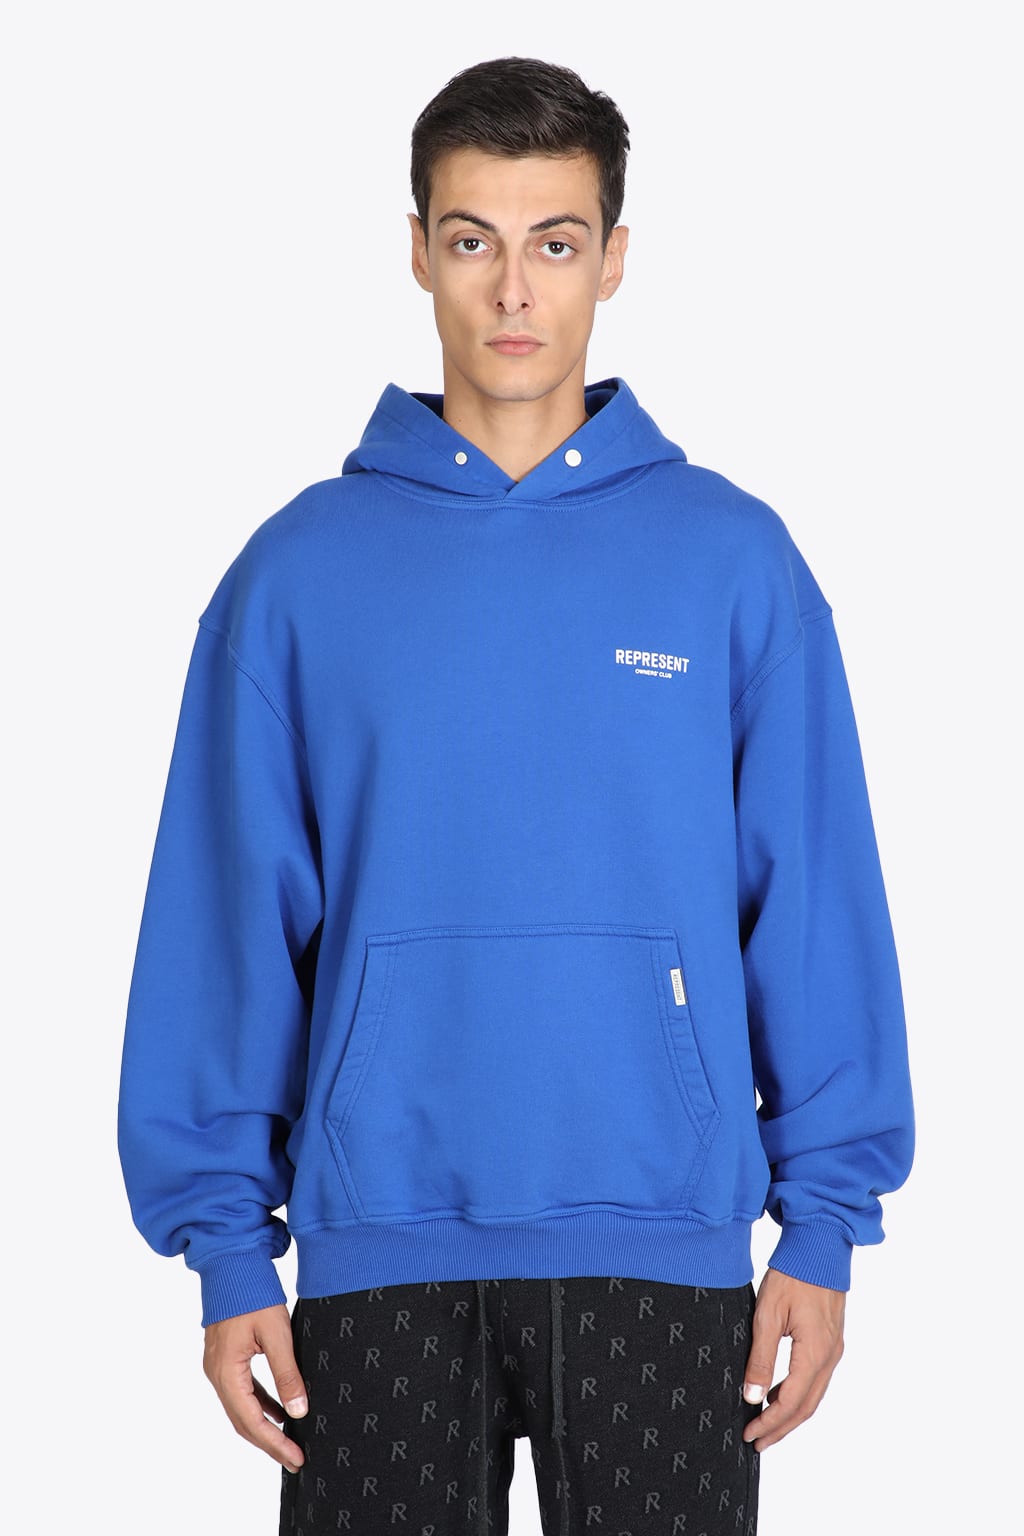 Represent Owners Club Hoodie Royal blue cotton hoodie with logo - Owners club hoodie